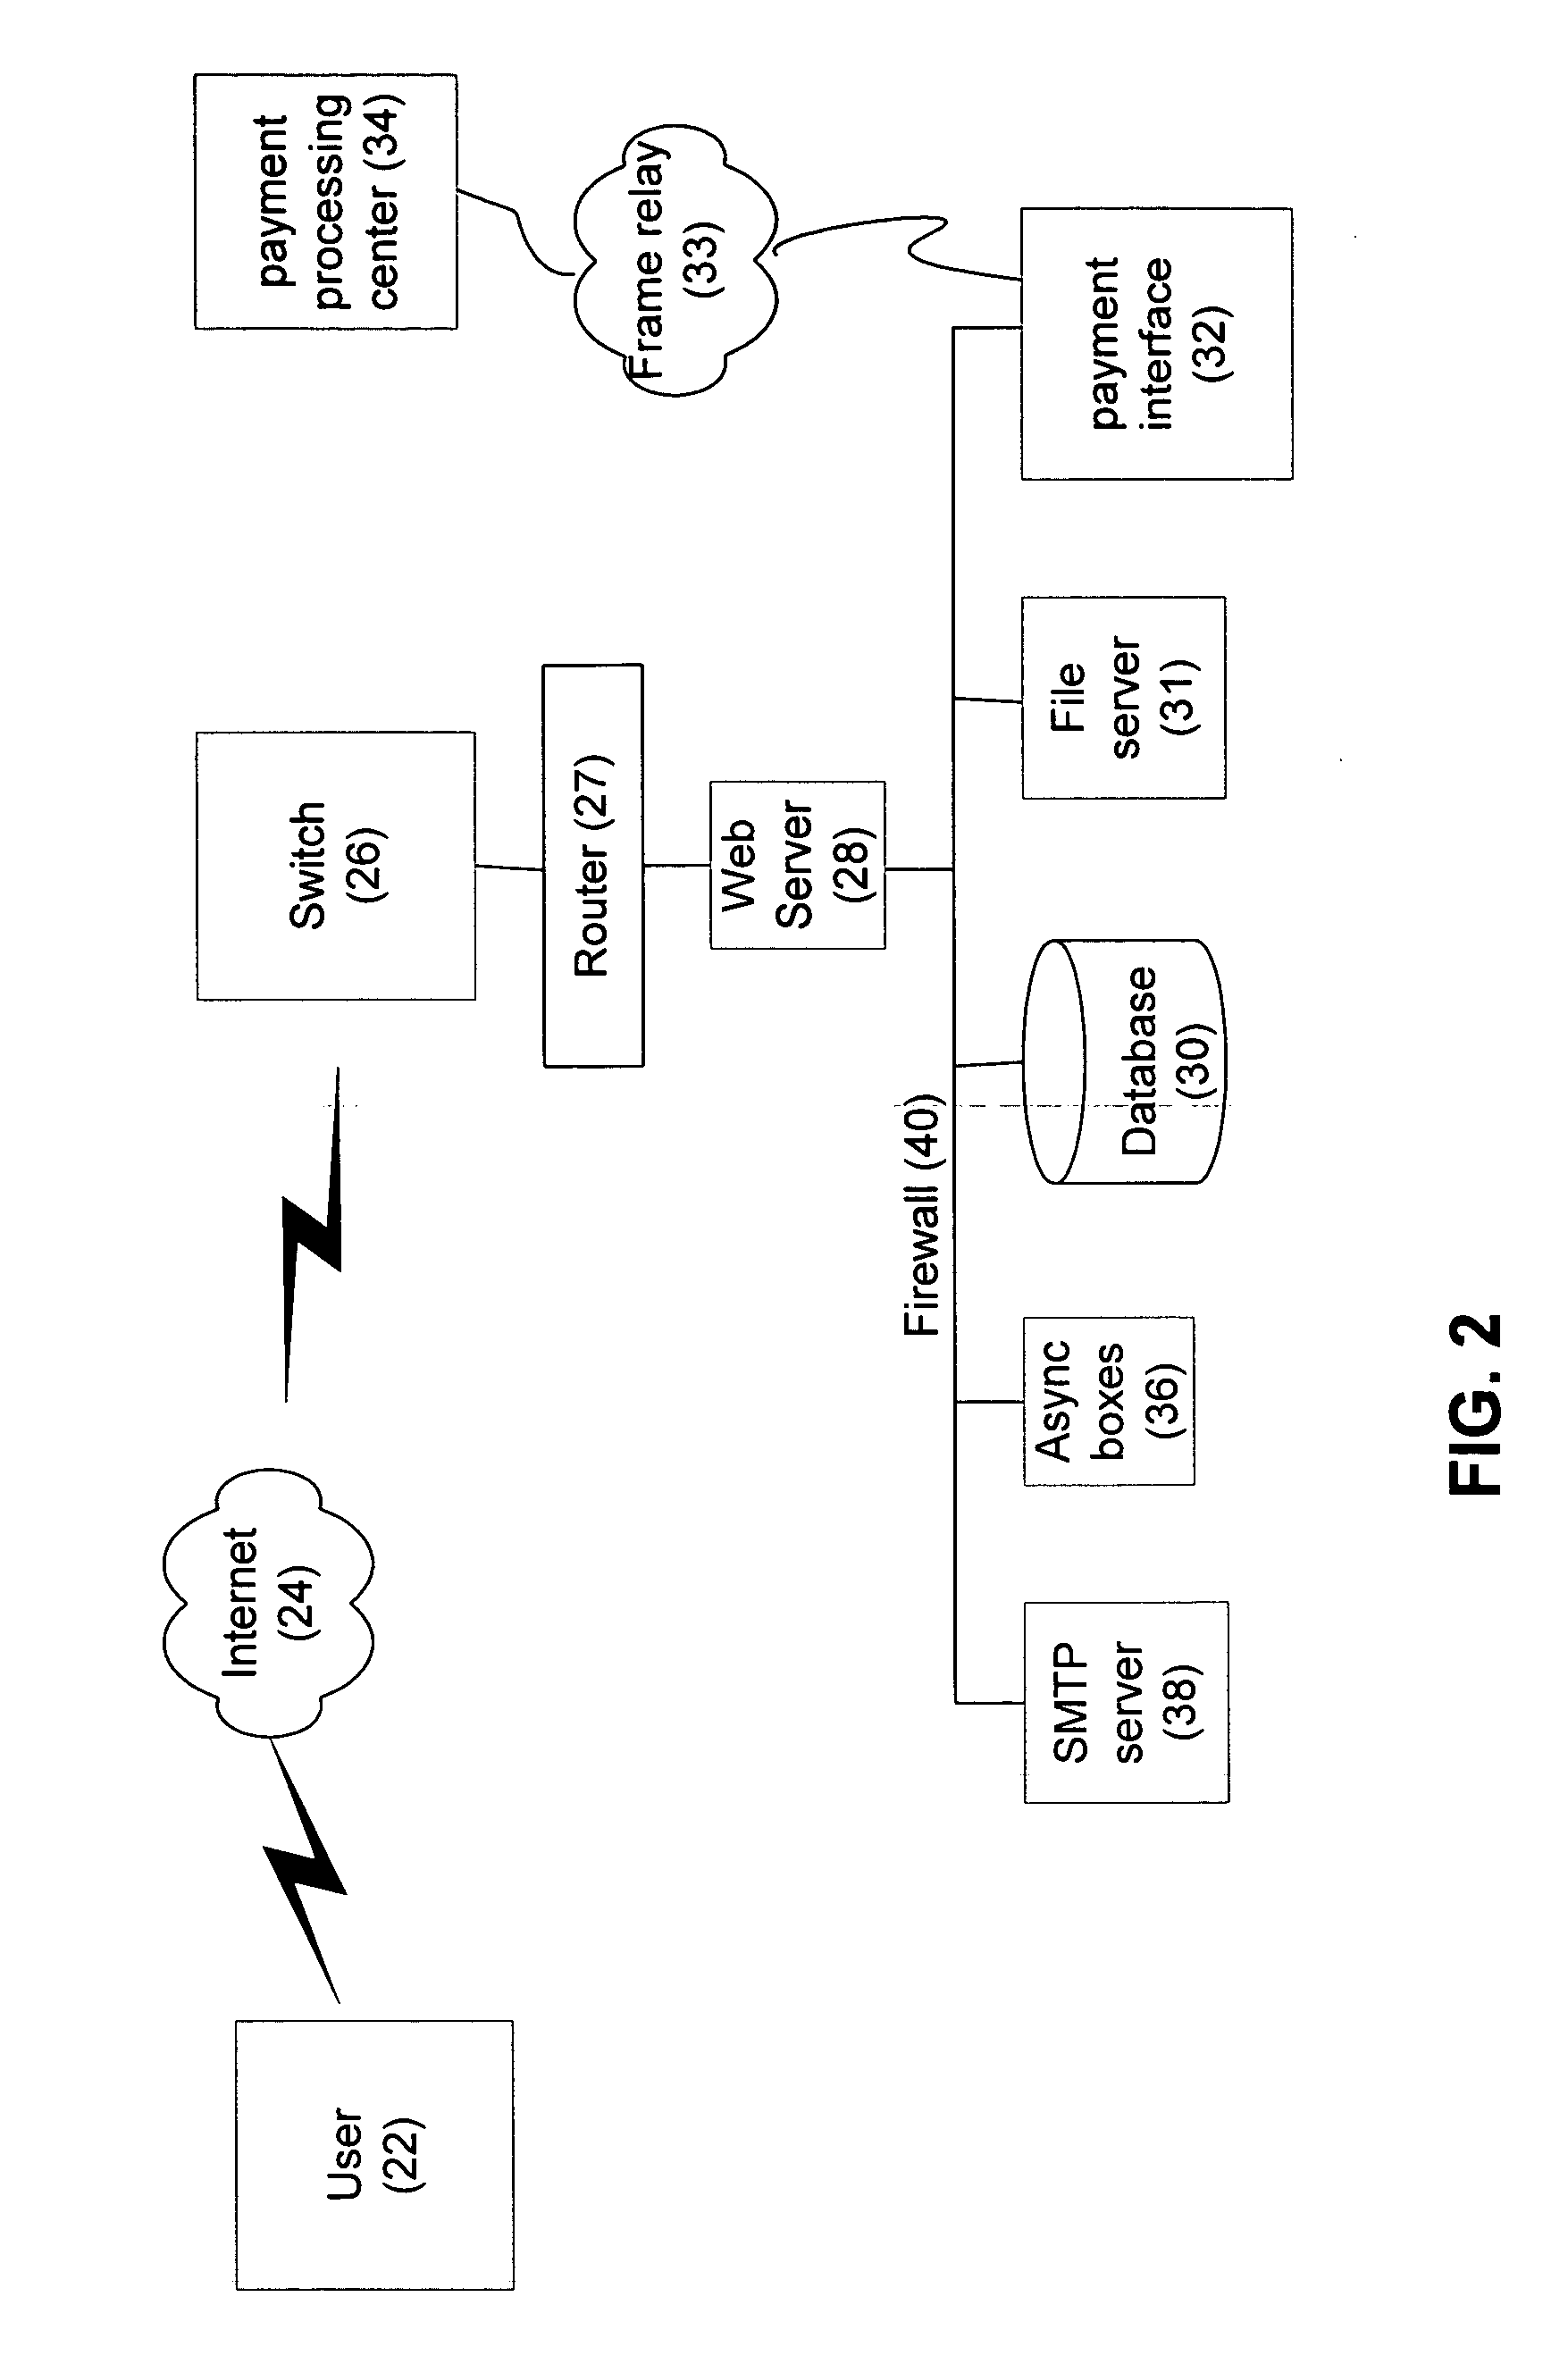 System and method for enterprise event marketing and management automation